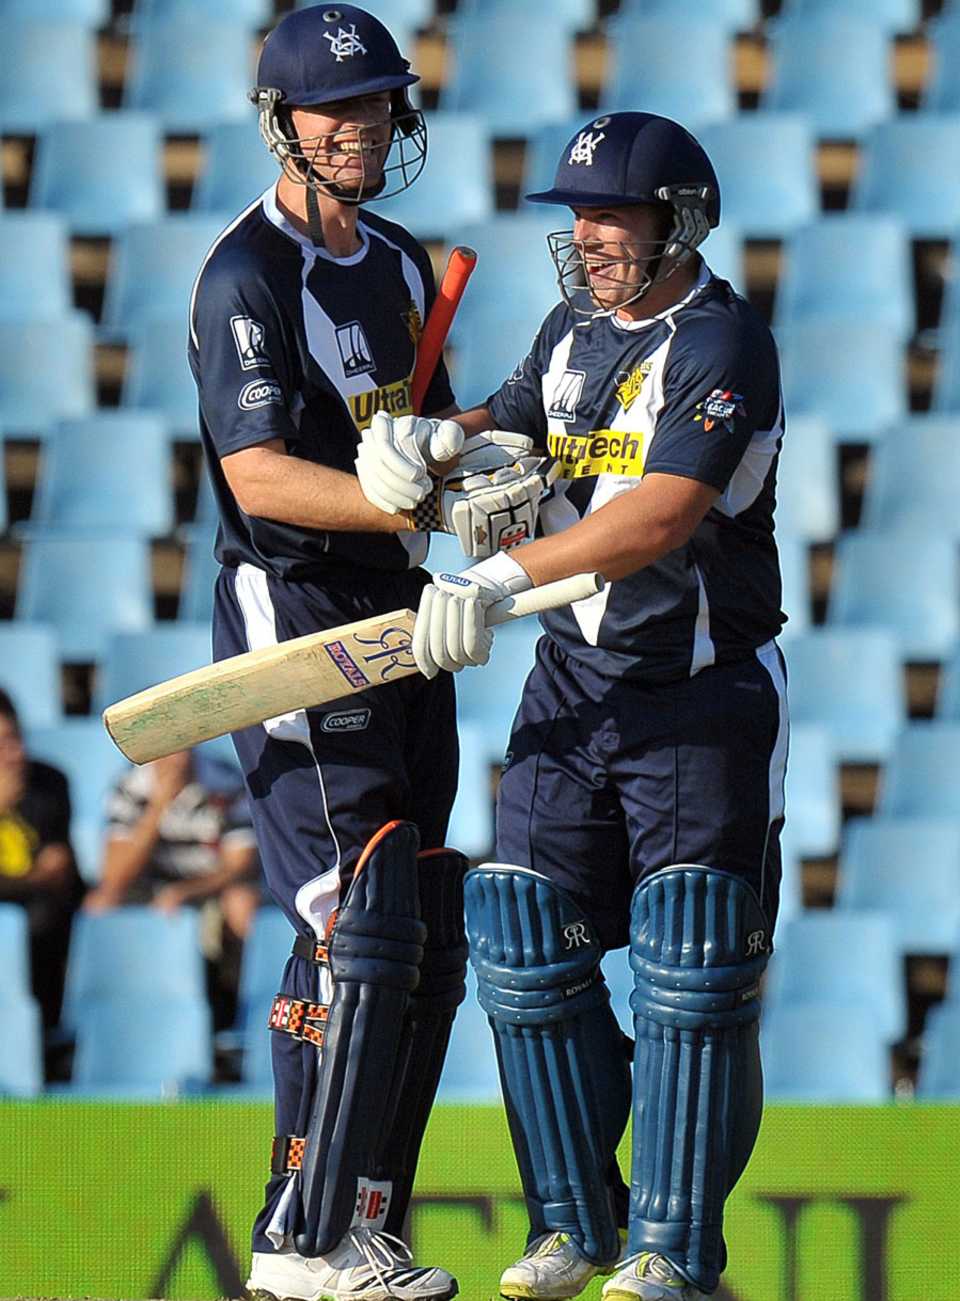 Aaron Finch and Andrew McDonald celebrate victory, Central Districts v Victoria, Champions League Twenty20, Centurion, September 15, 2010